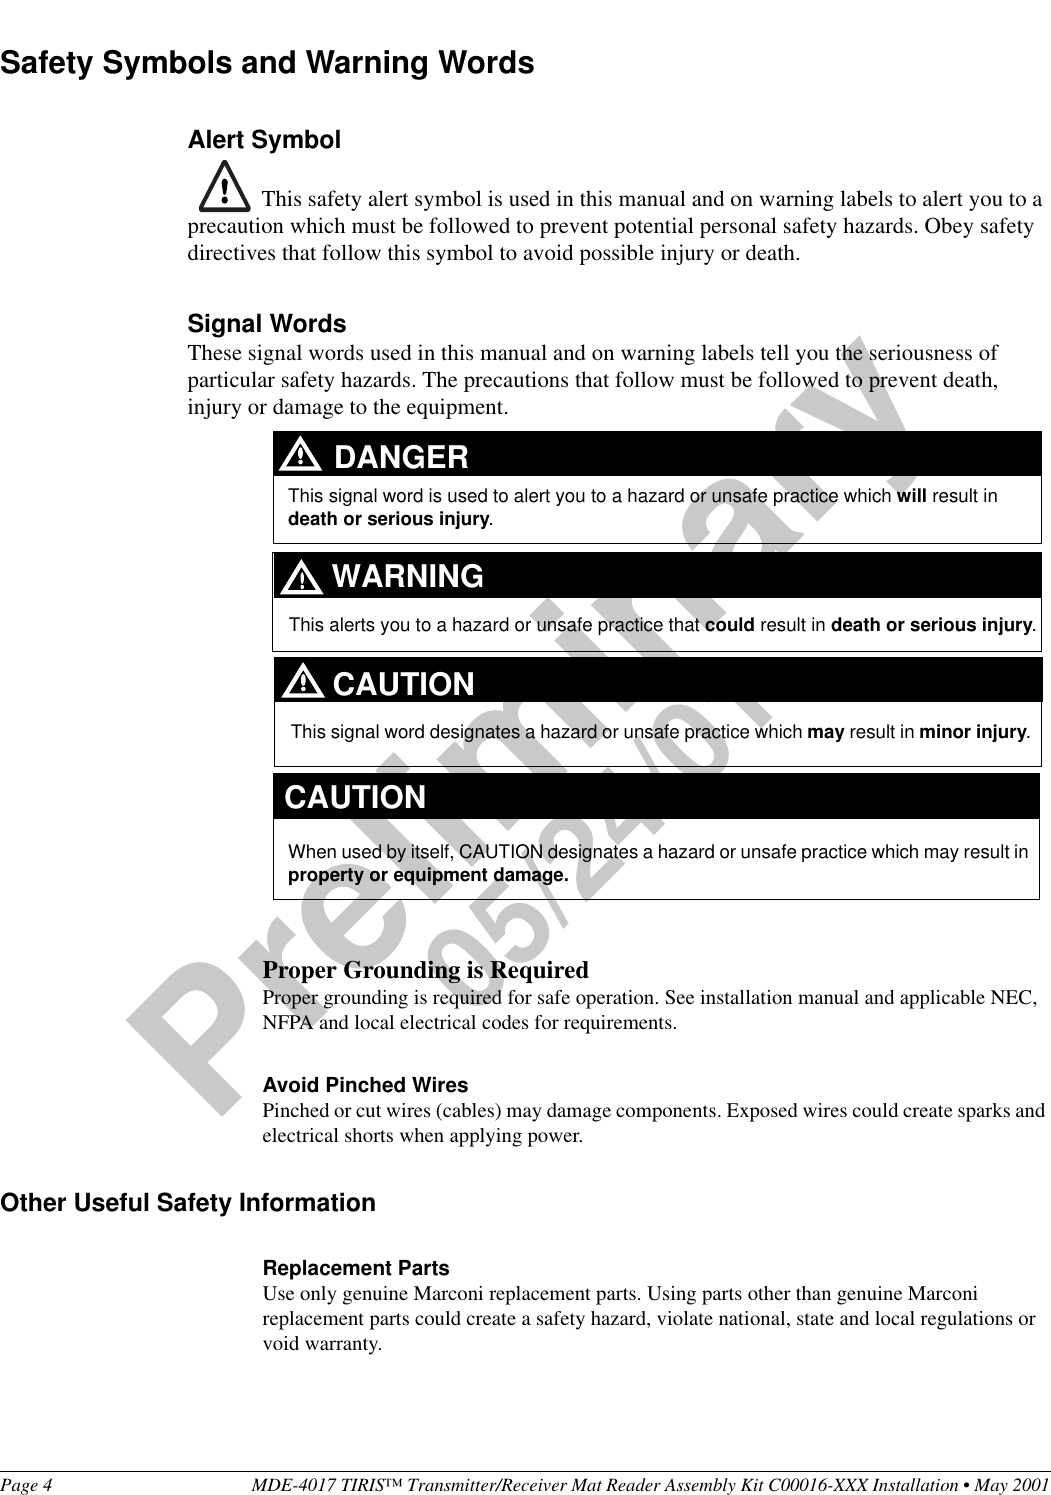 Page 4 MDE-4017 TIRIS™ Transmitter/Receiver Mat Reader Assembly Kit C00016-XXX Installation • May 2001Preliminary05/24/01Safety Symbols and Warning WordsAlert Symbol This safety alert symbol is used in this manual and on warning labels to alert you to a precaution which must be followed to prevent potential personal safety hazards. Obey safety directives that follow this symbol to avoid possible injury or death.Signal WordsThese signal words used in this manual and on warning labels tell you the seriousness of particular safety hazards. The precautions that follow must be followed to prevent death, injury or damage to the equipment.Proper Grounding is RequiredProper grounding is required for safe operation. See installation manual and applicable NEC, NFPA and local electrical codes for requirements.Avoid Pinched WiresPinched or cut wires (cables) may damage components. Exposed wires could create sparks and electrical shorts when applying power.Other Useful Safety InformationReplacement PartsUse only genuine Marconi replacement parts. Using parts other than genuine Marconi replacement parts could create a safety hazard, violate national, state and local regulations or void warranty.This signal word designates a hazard or unsafe practice which may result in minor injury.This signal word is used to alert you to a hazard or unsafe practice which will result in death or serious injury.This alerts you to a hazard or unsafe practice that could result in death or serious injury.CAUTIONWhen used by itself, CAUTION designates a hazard or unsafe practice which may result in property or equipment damage.CAUTIONDANGERWARNING